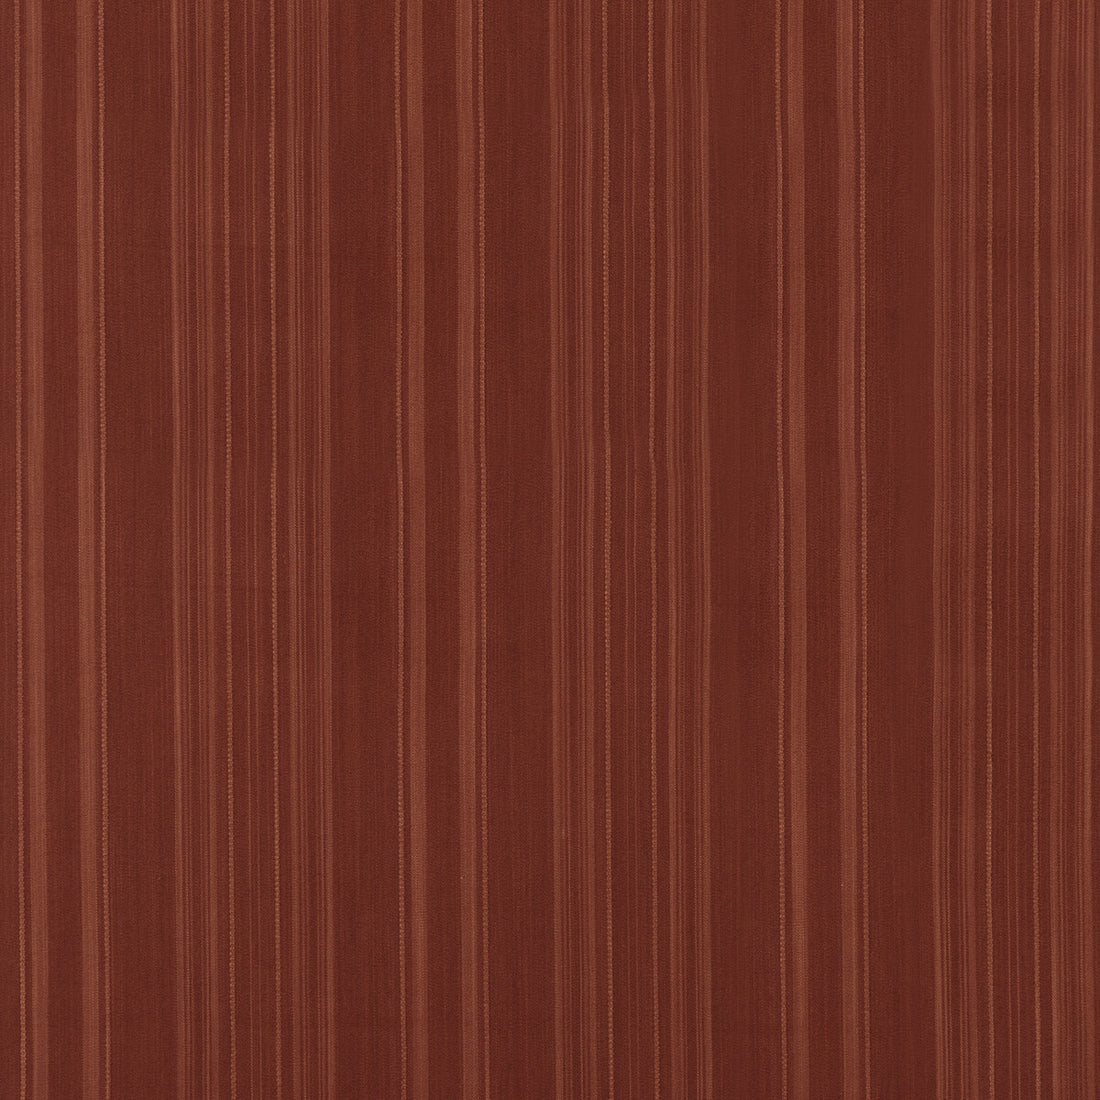 City Stripe fabric in russet color - pattern FD757.V55.0 - by Mulberry in the Festival collection